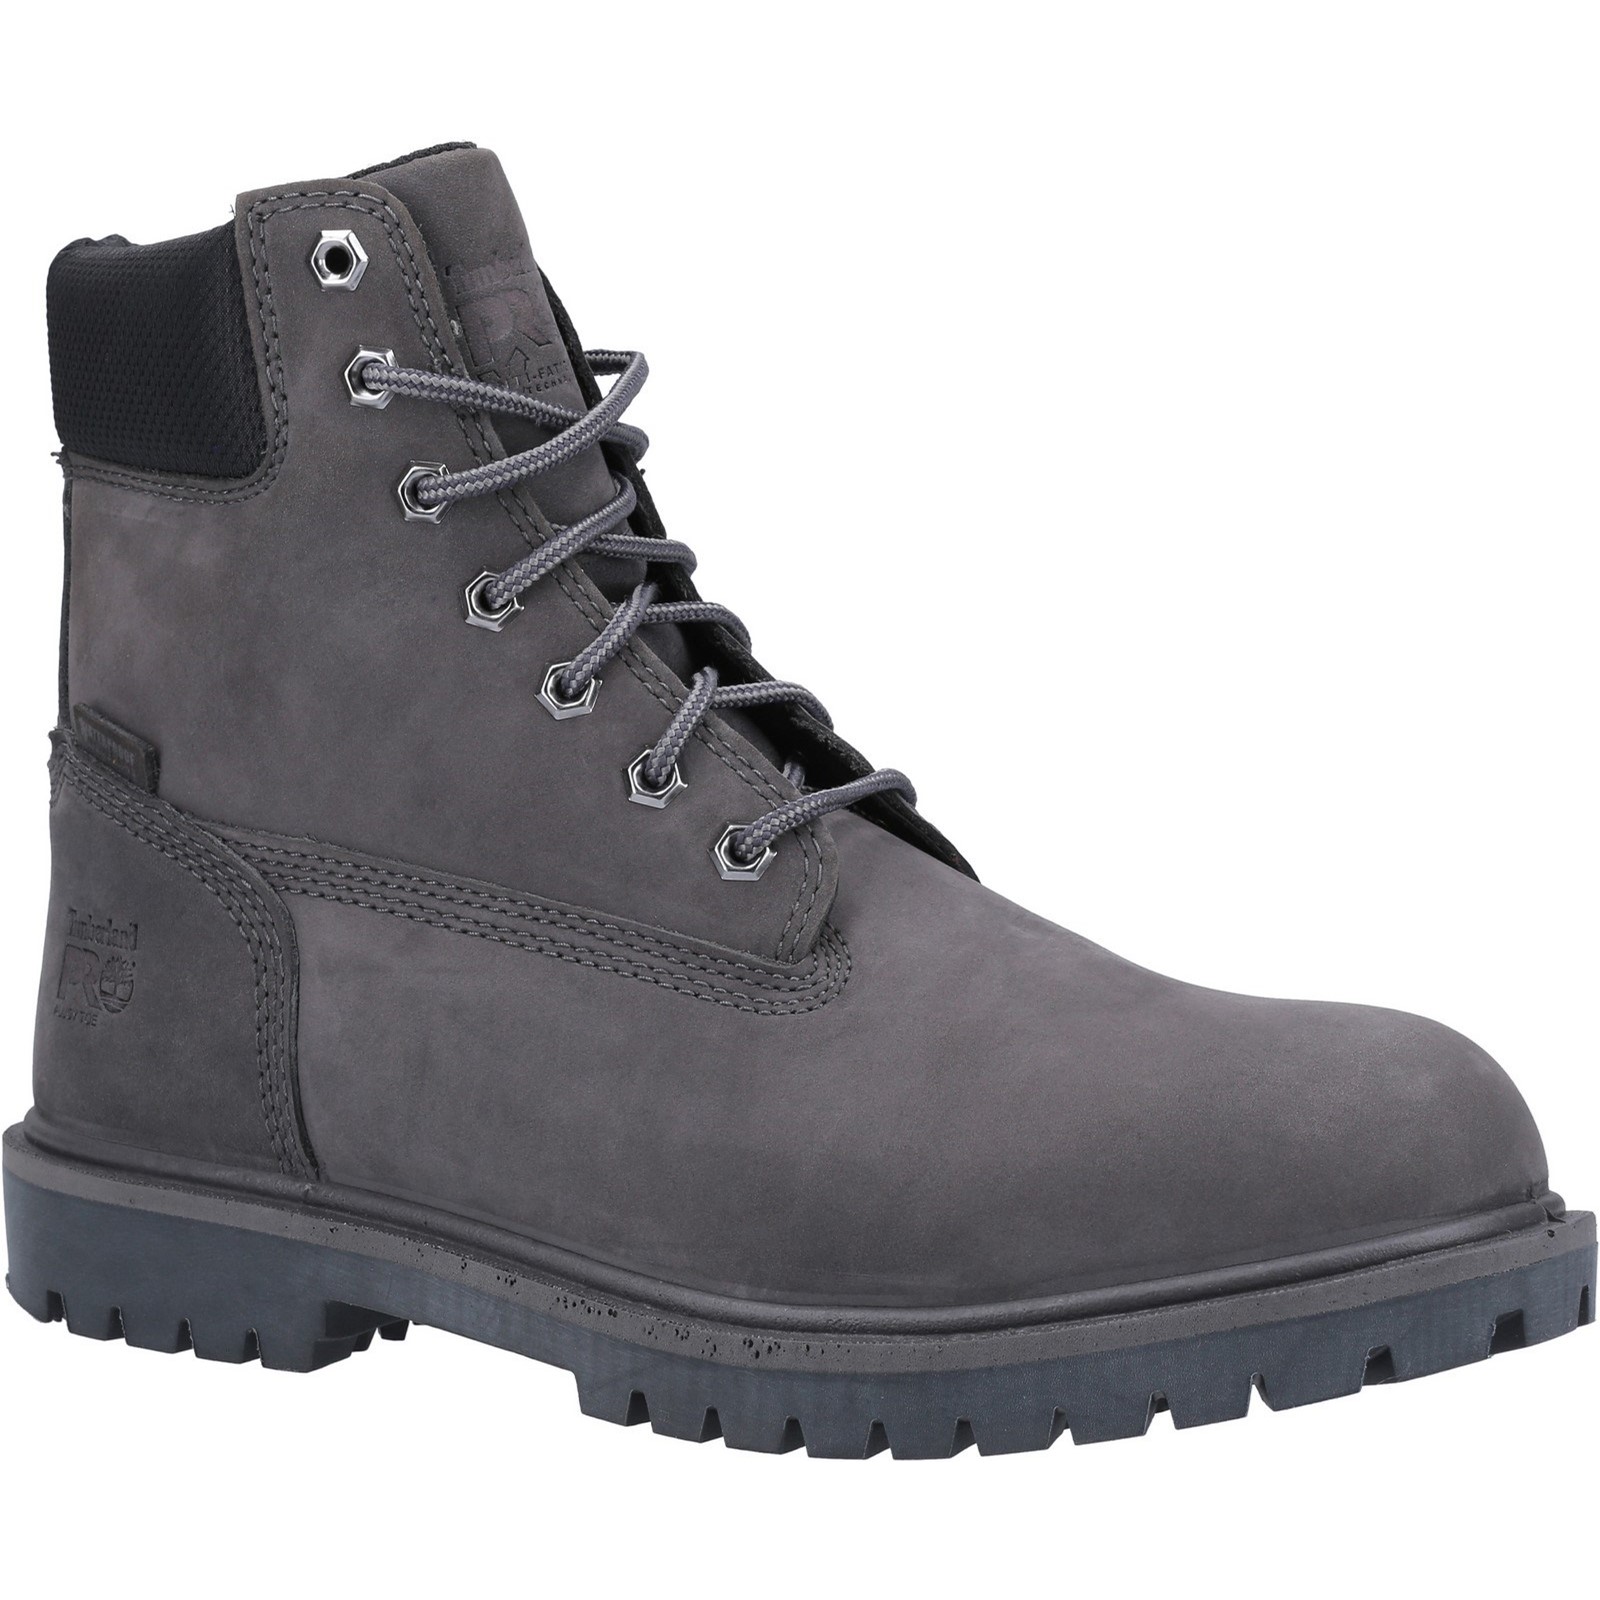 Iconic Safety Toe Work Boot Grey